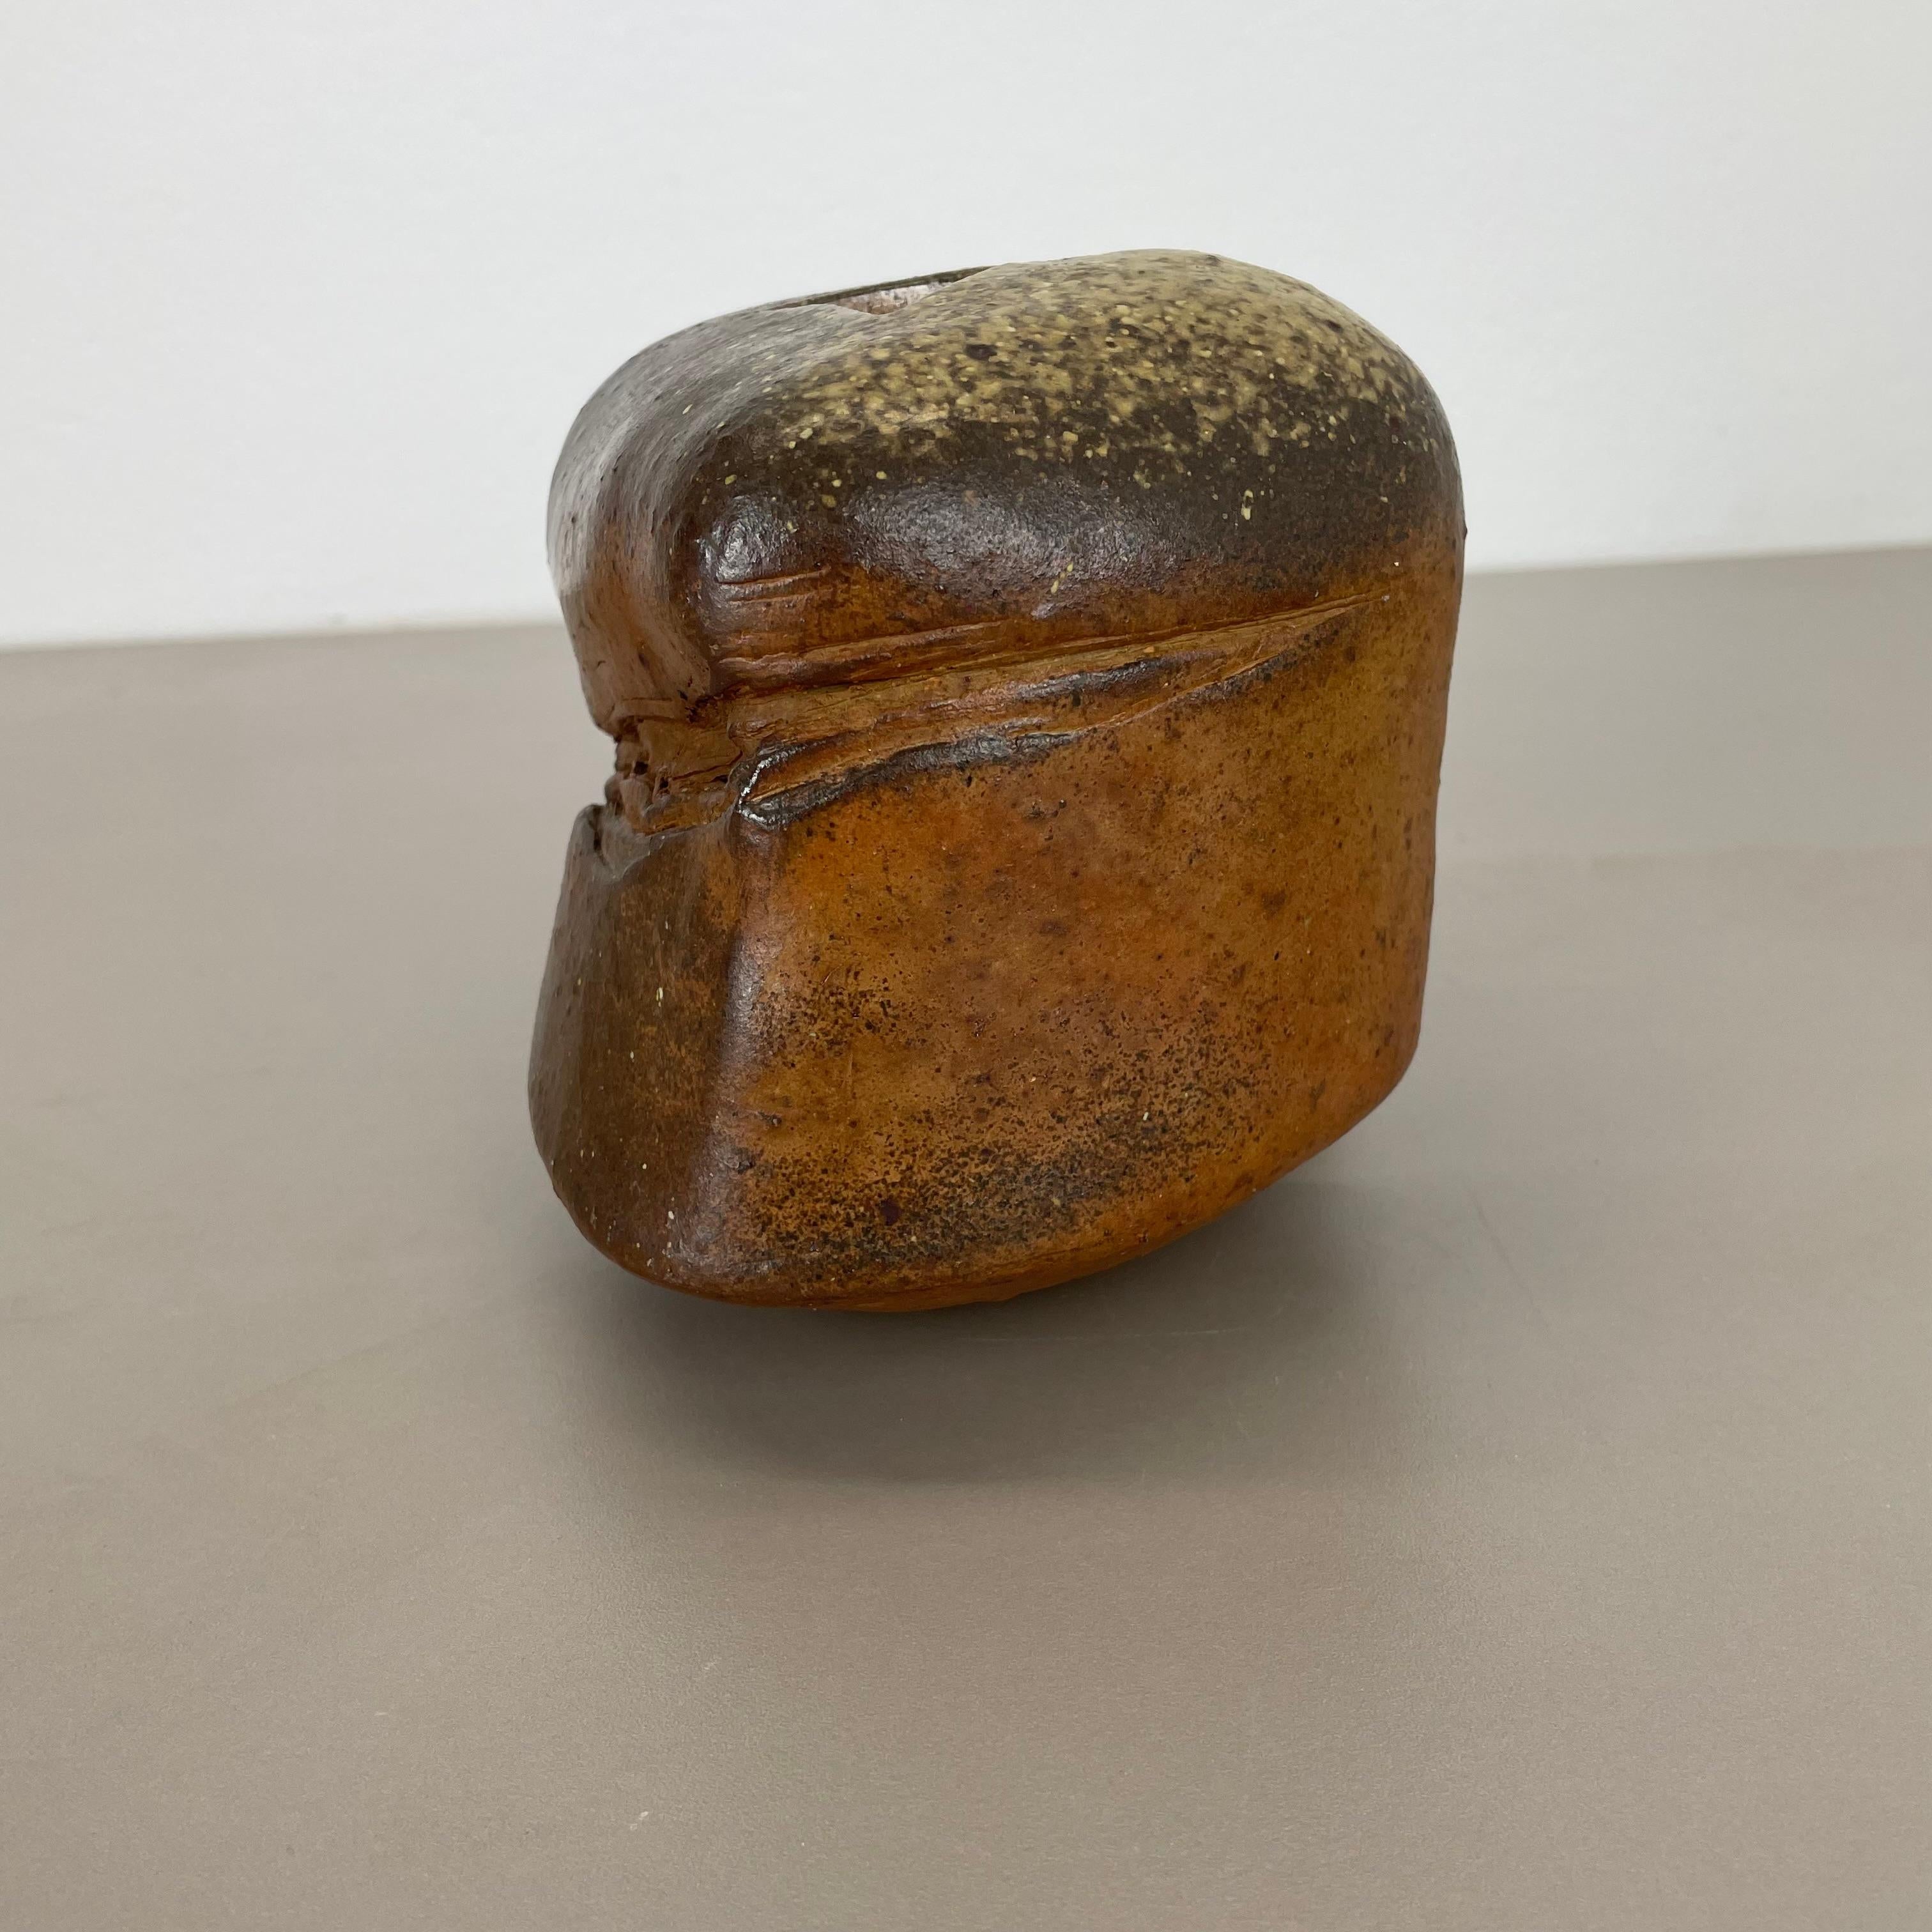 Abstract Ceramic Studio Pottery Object by.Horst Kerstan, Kandern Germany 1980s For Sale 8